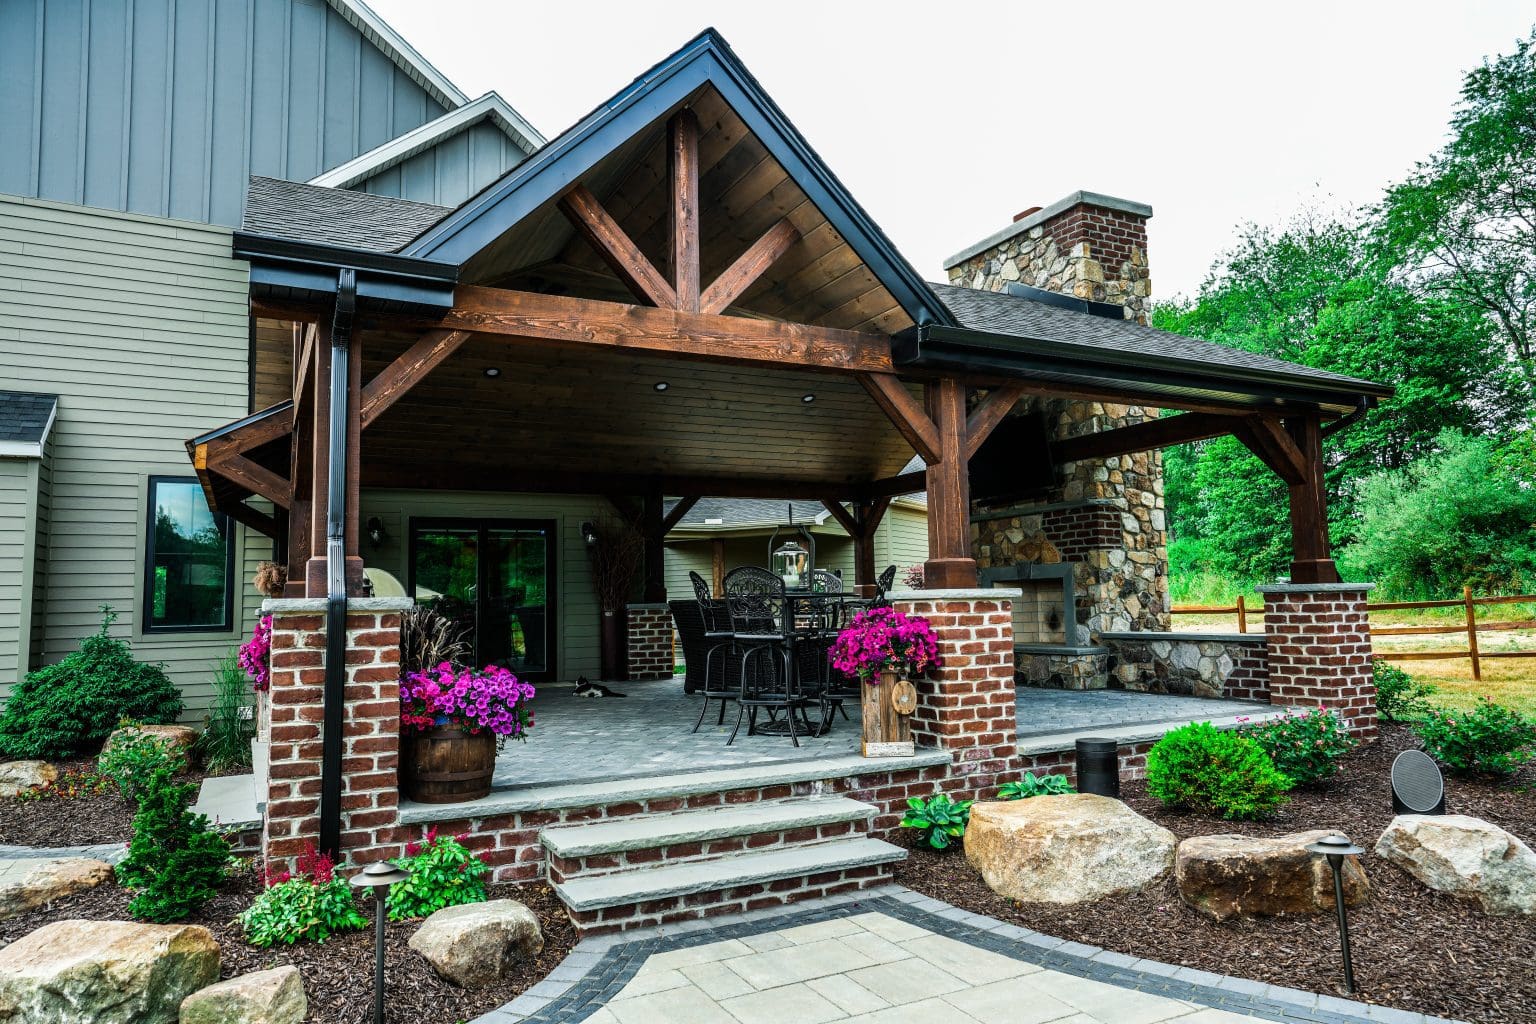 A home with a covered patio and stone walkway showcasing an exquisite landscape design.